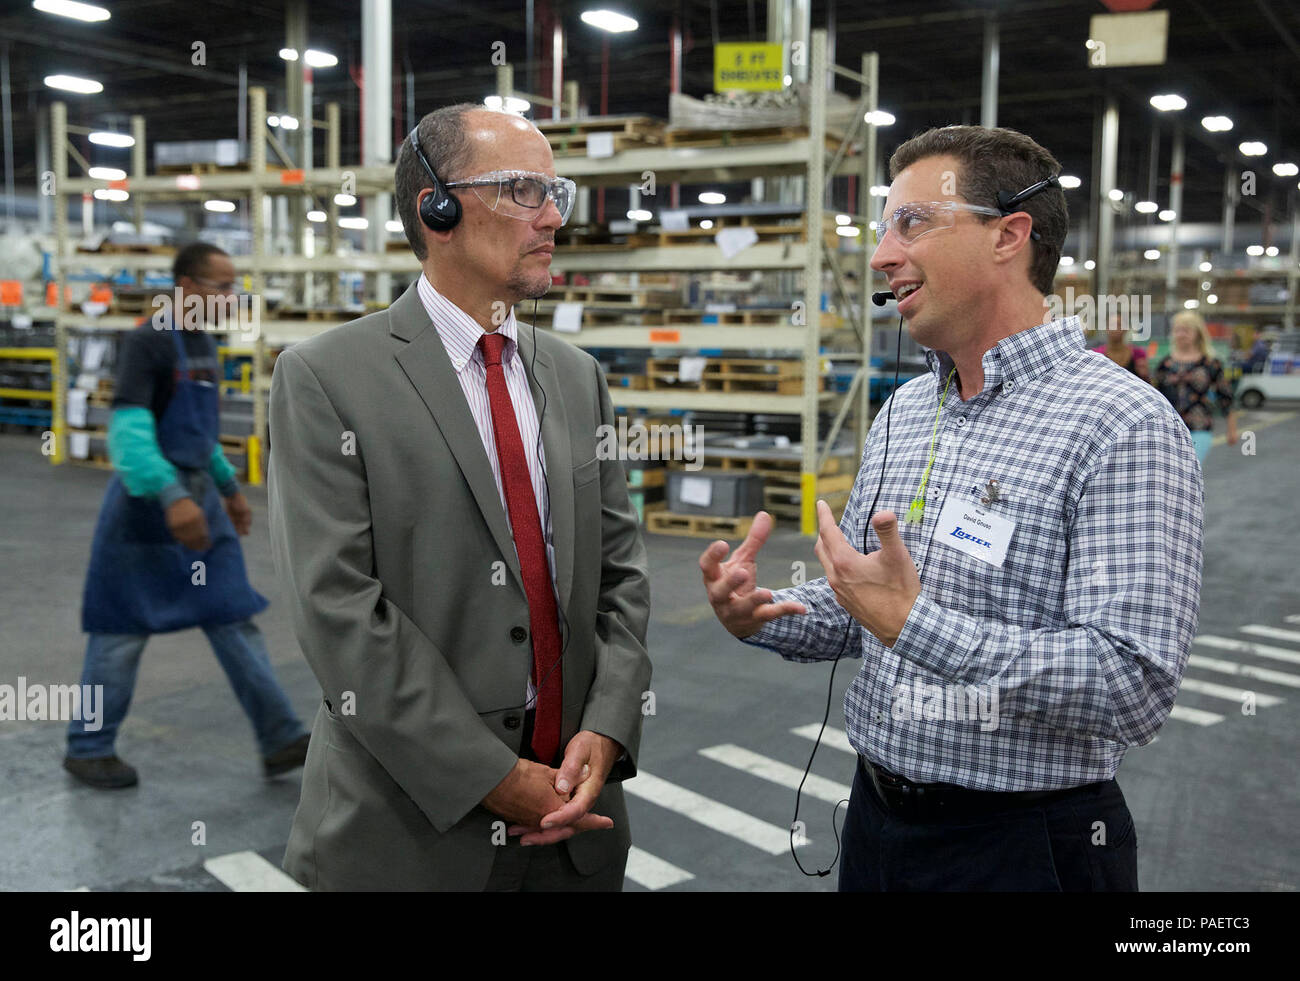 17 August 2015 - Omaha, NE - Labor Secretary Thomas Perez (L) tours the Lozier CorporationХs North Omaha factory with LozierХs Vice President of Operations, David Gnuse (R). The Lozier Corporation is one of the countryХs leading manufacturers of retail store fixtures. The secretary later took part in a roundtable discussion at Lozier with business people, union representatives, community advocates and elected officials who supported the recent Nebraska ballot initiative to increase the stateХs minimum wage. Stock Photo